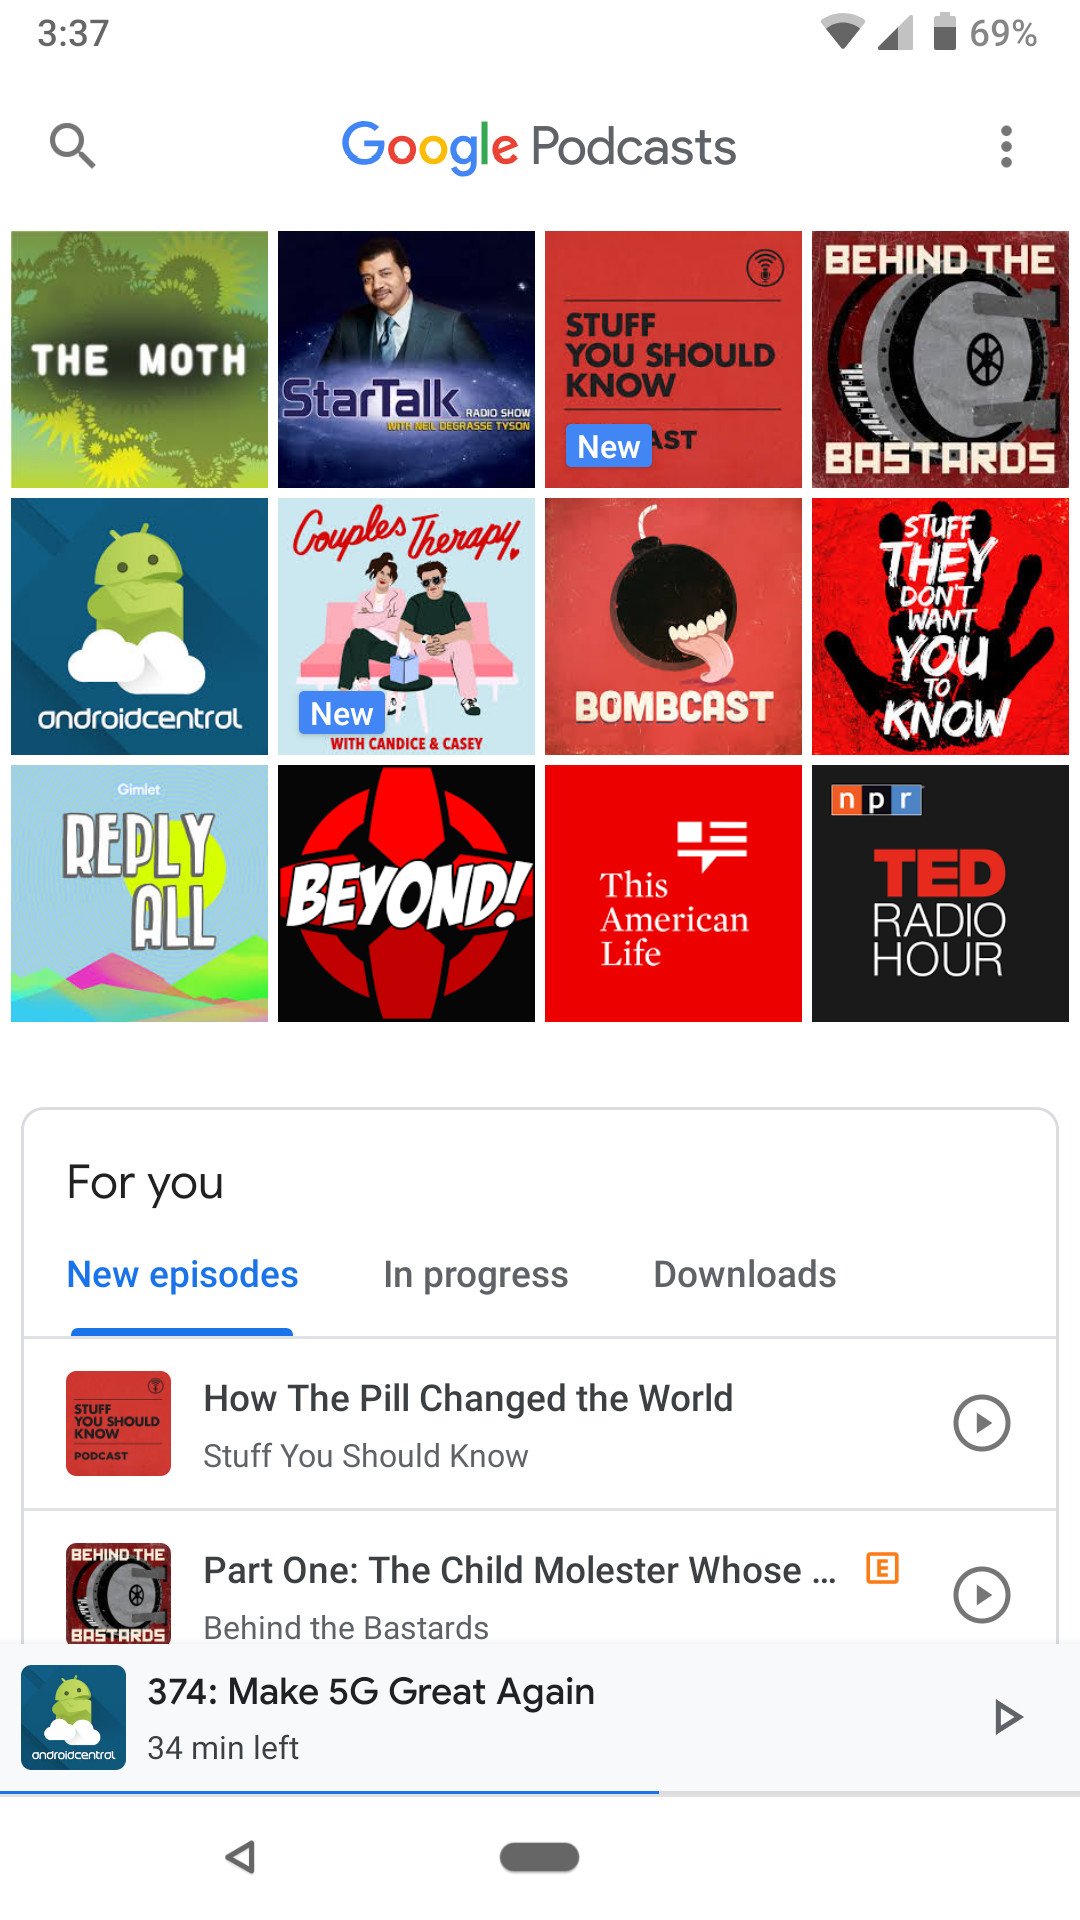 google-podcasts-how-to-use-17.jpg?itok=A